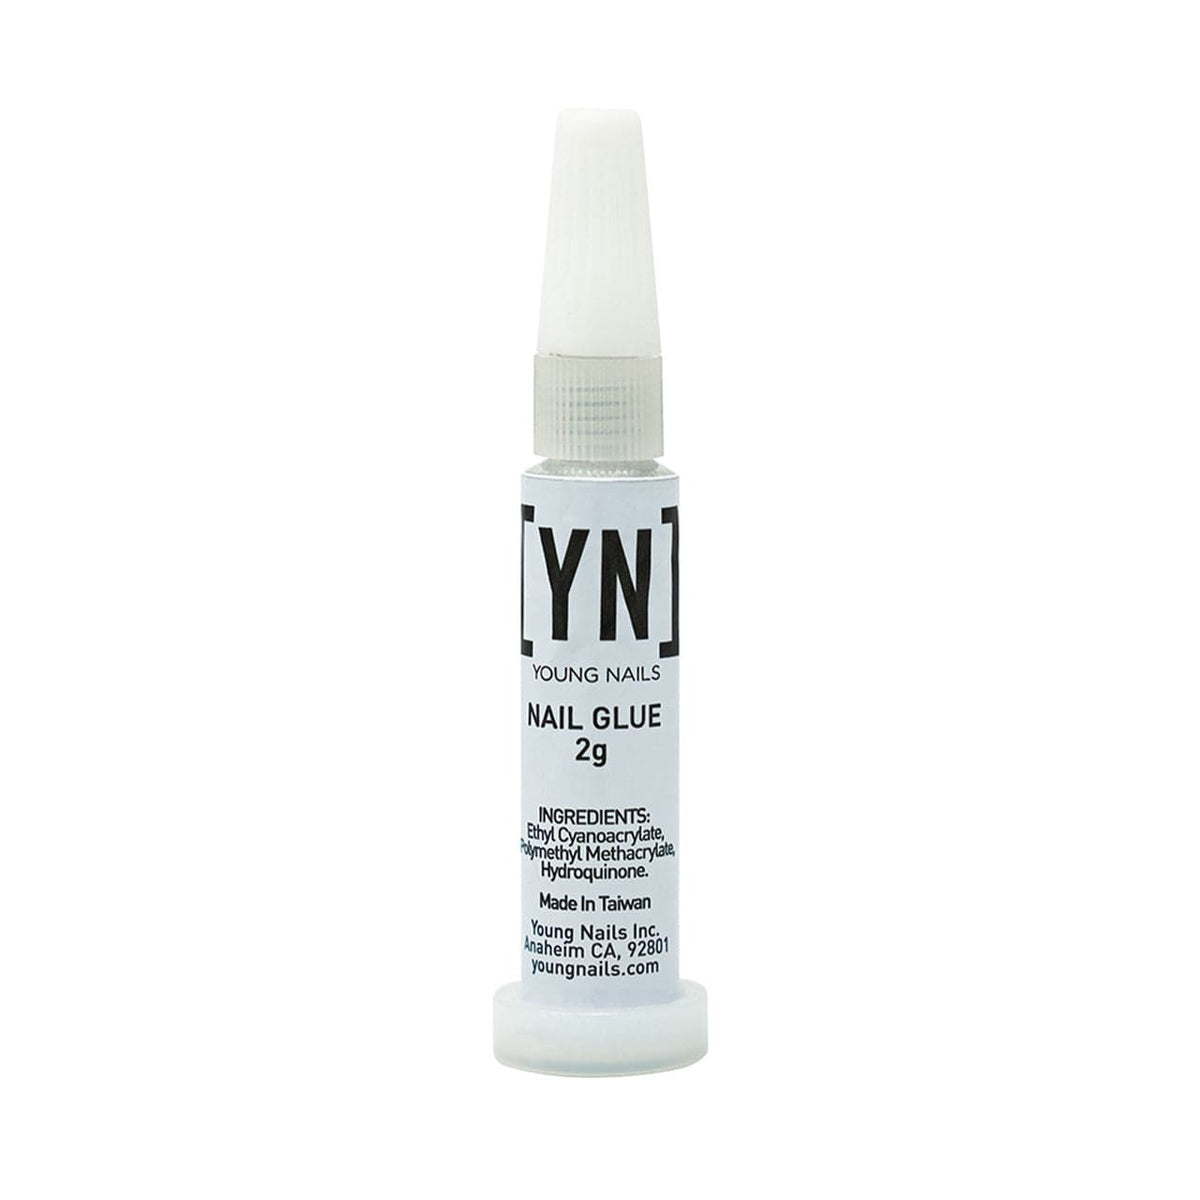 YN Nail Glue Nails - Young Nails - Luxe Pacifique